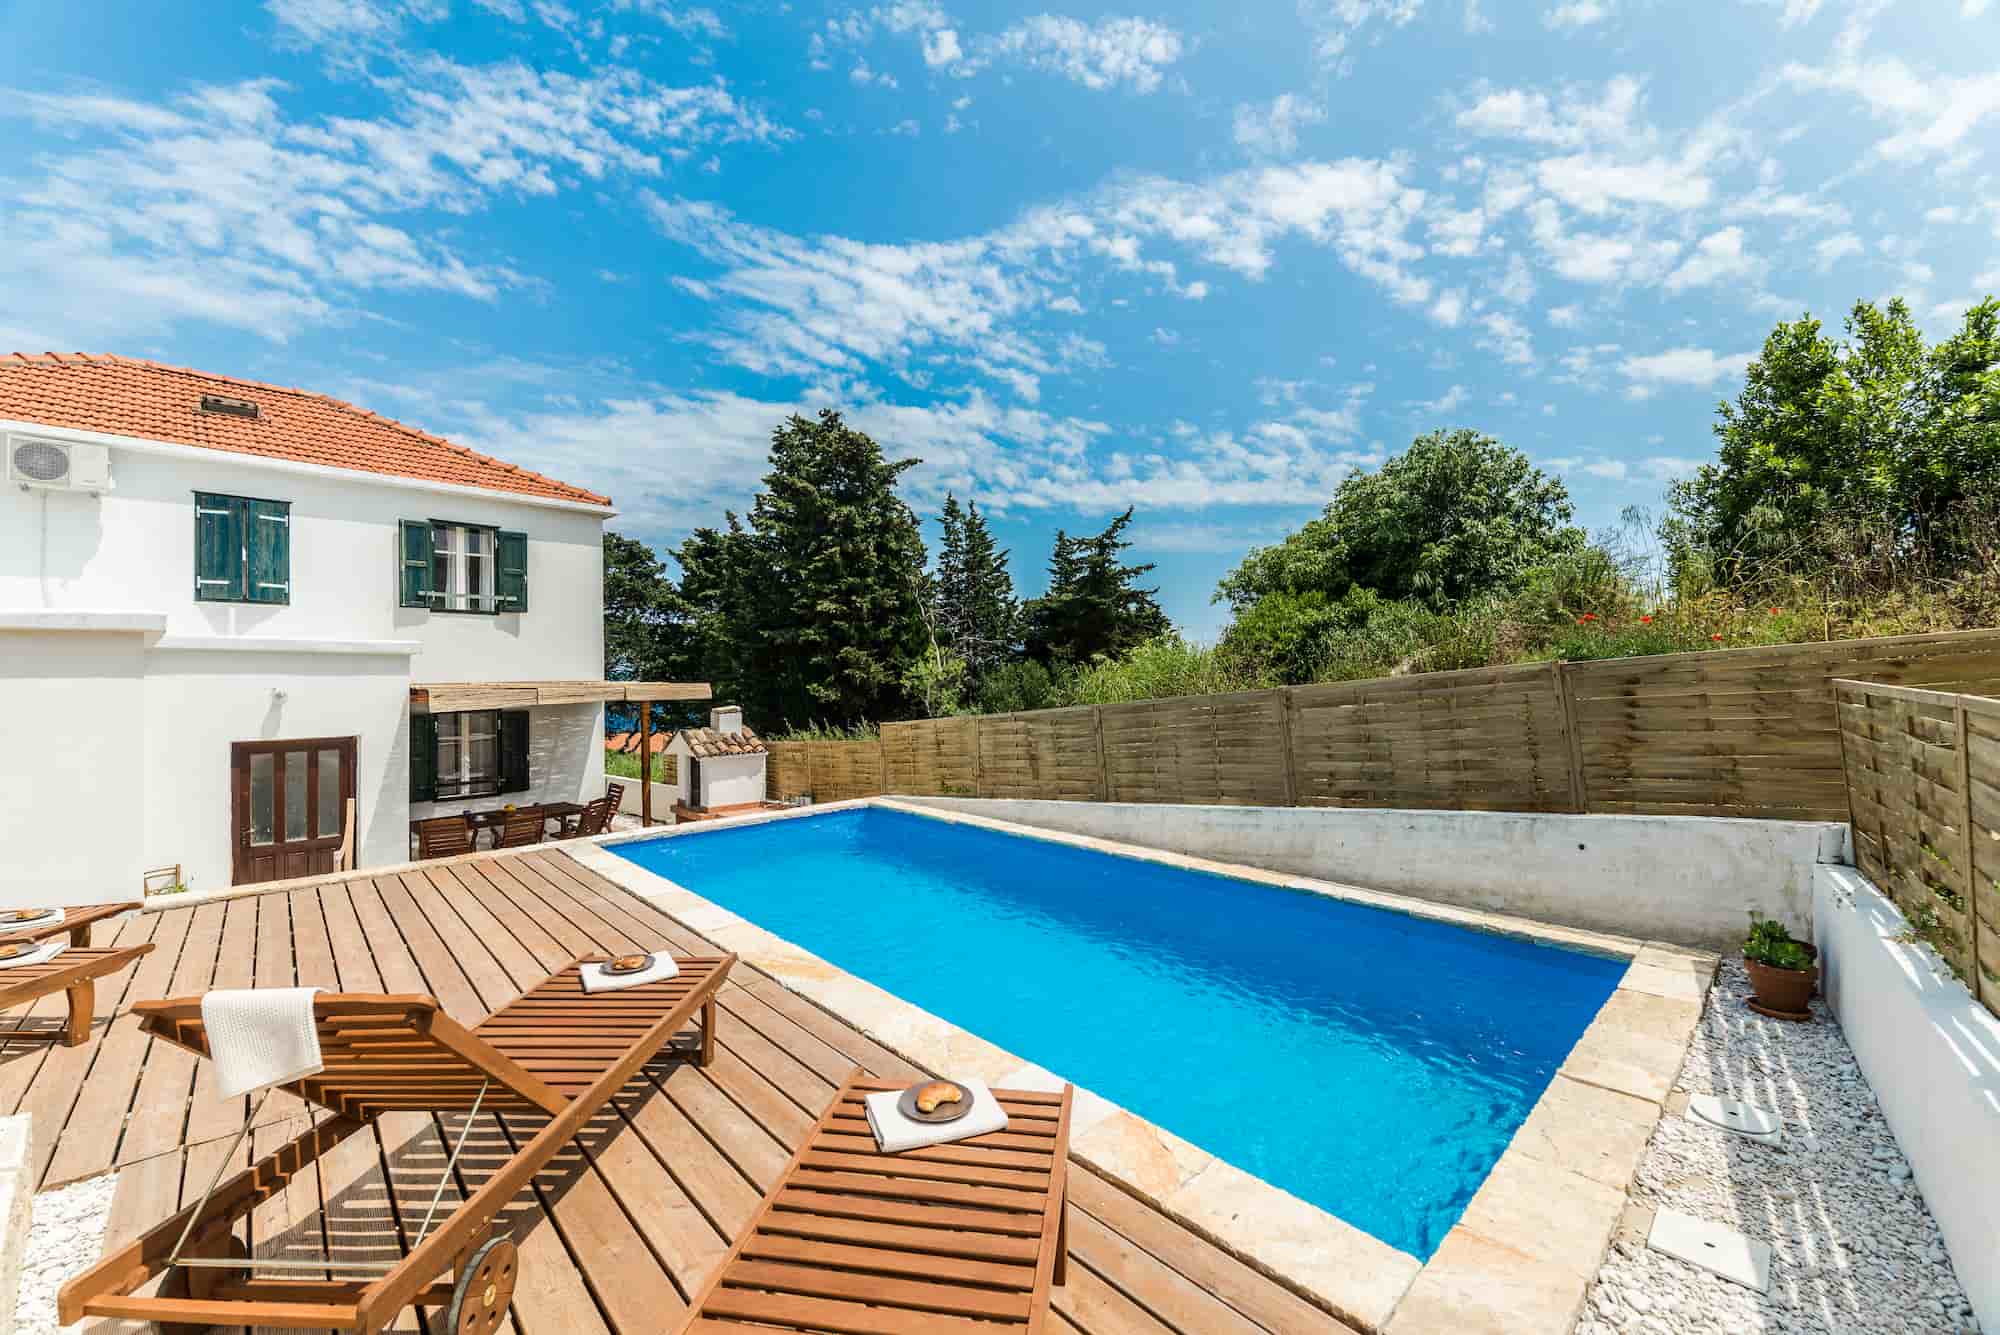 Villa with pool, close to the beach in unspoilt nature